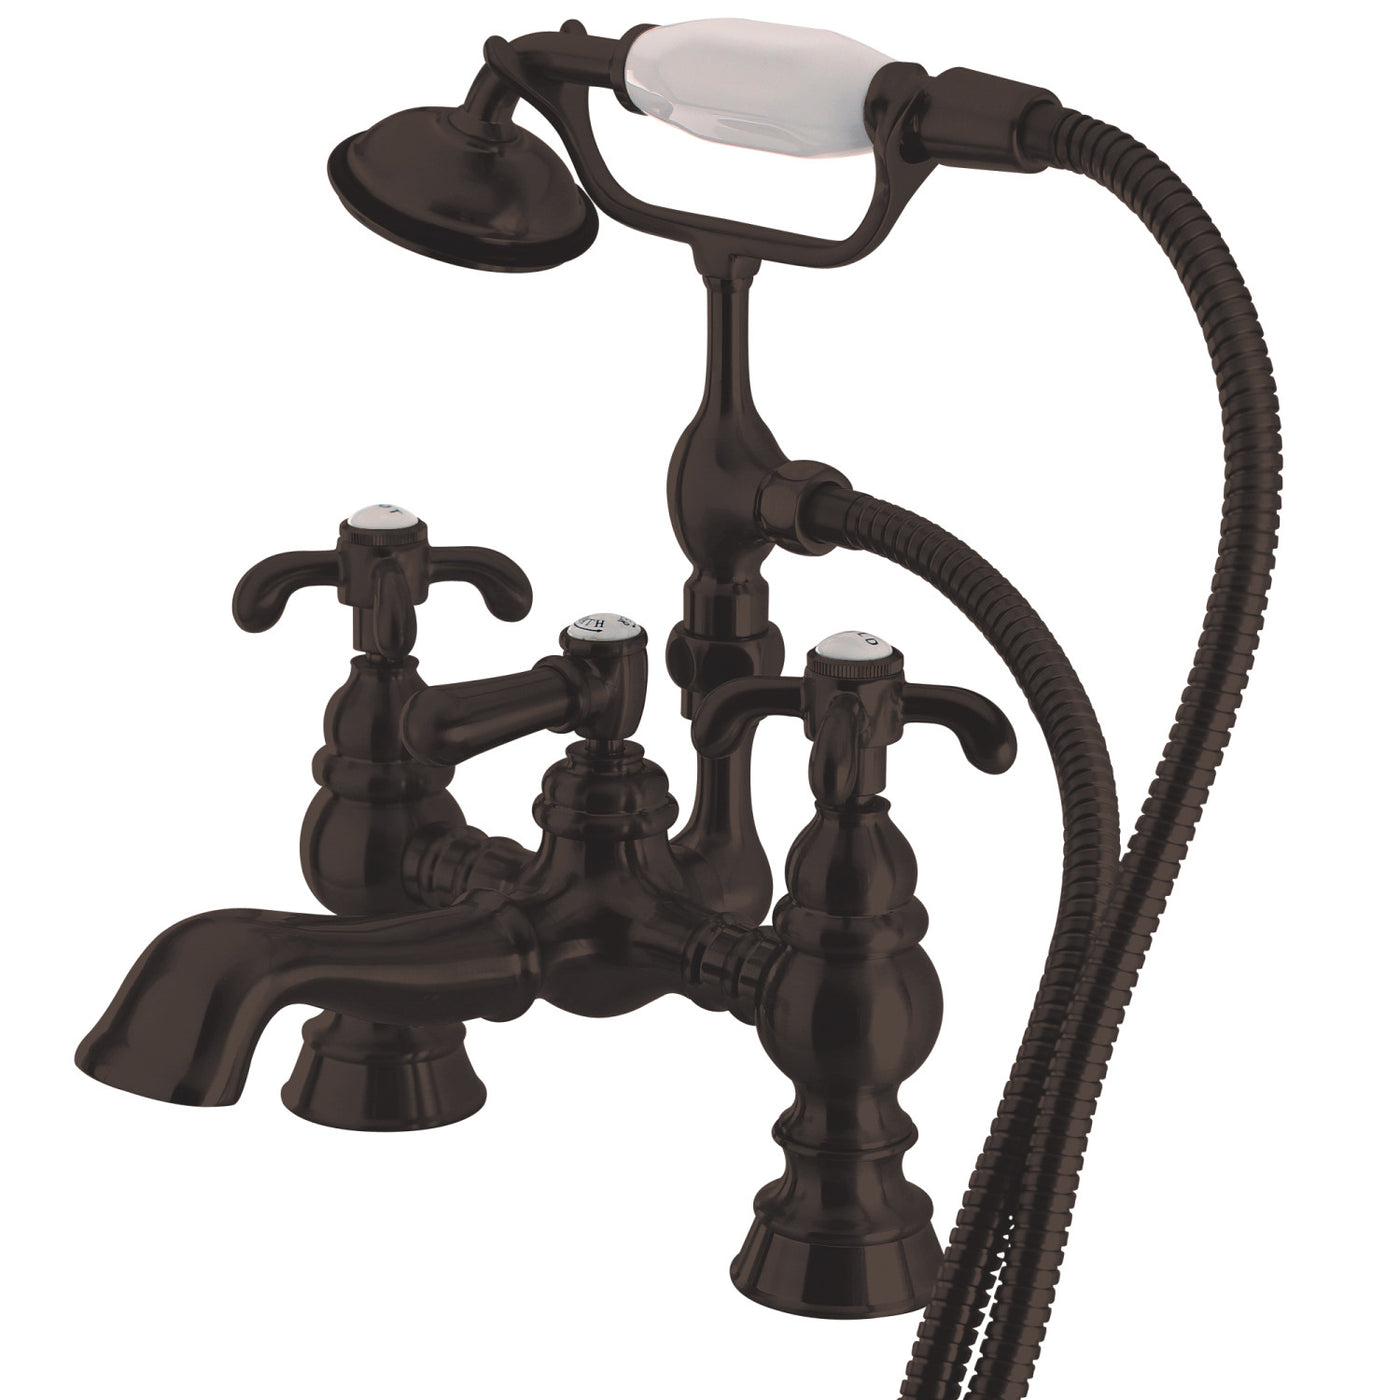 Elements of Design DT11525VX 7-Inch Deck Mount Tub Faucet with Hand Shower, Oil Rubbed Bronze